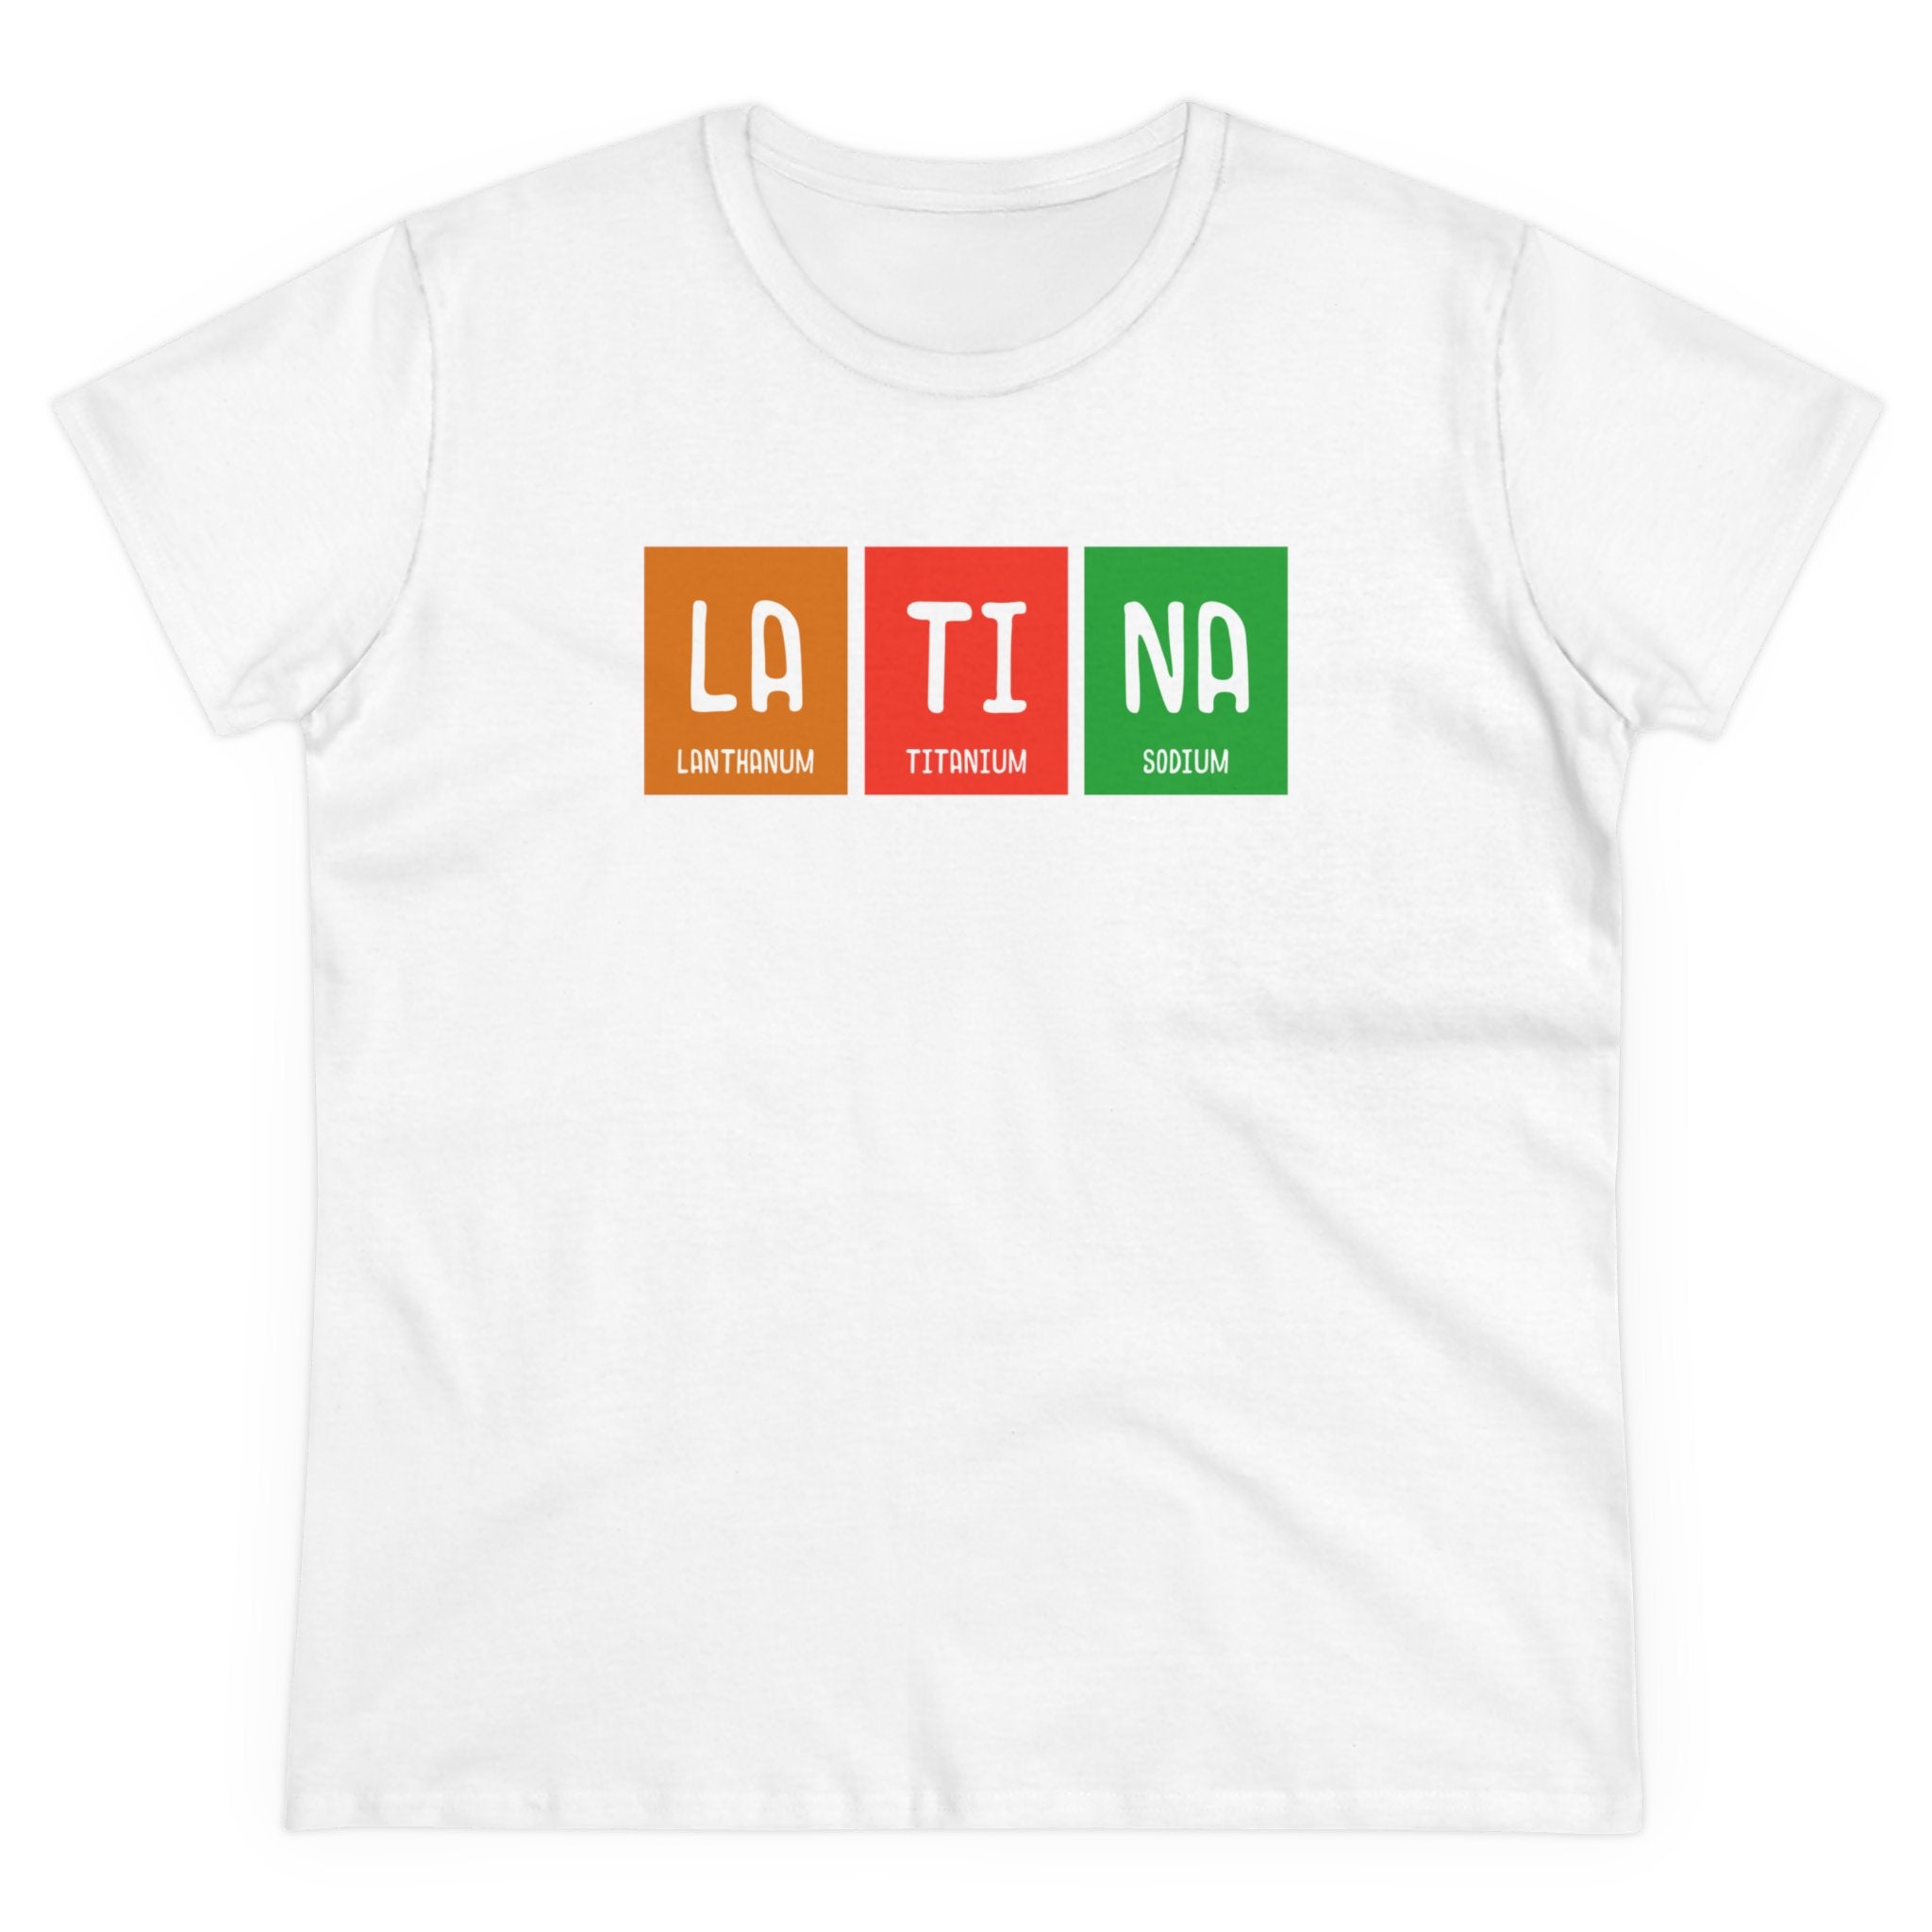 LA-TI-NA - Women's Tee featuring the word "LATINA" styled as periodic table elements: Lanthanum (La) in orange, Titanium (Ti) in red, and Sodium (Na) in green. Made from soft, US-grown cotton for premium comfort.